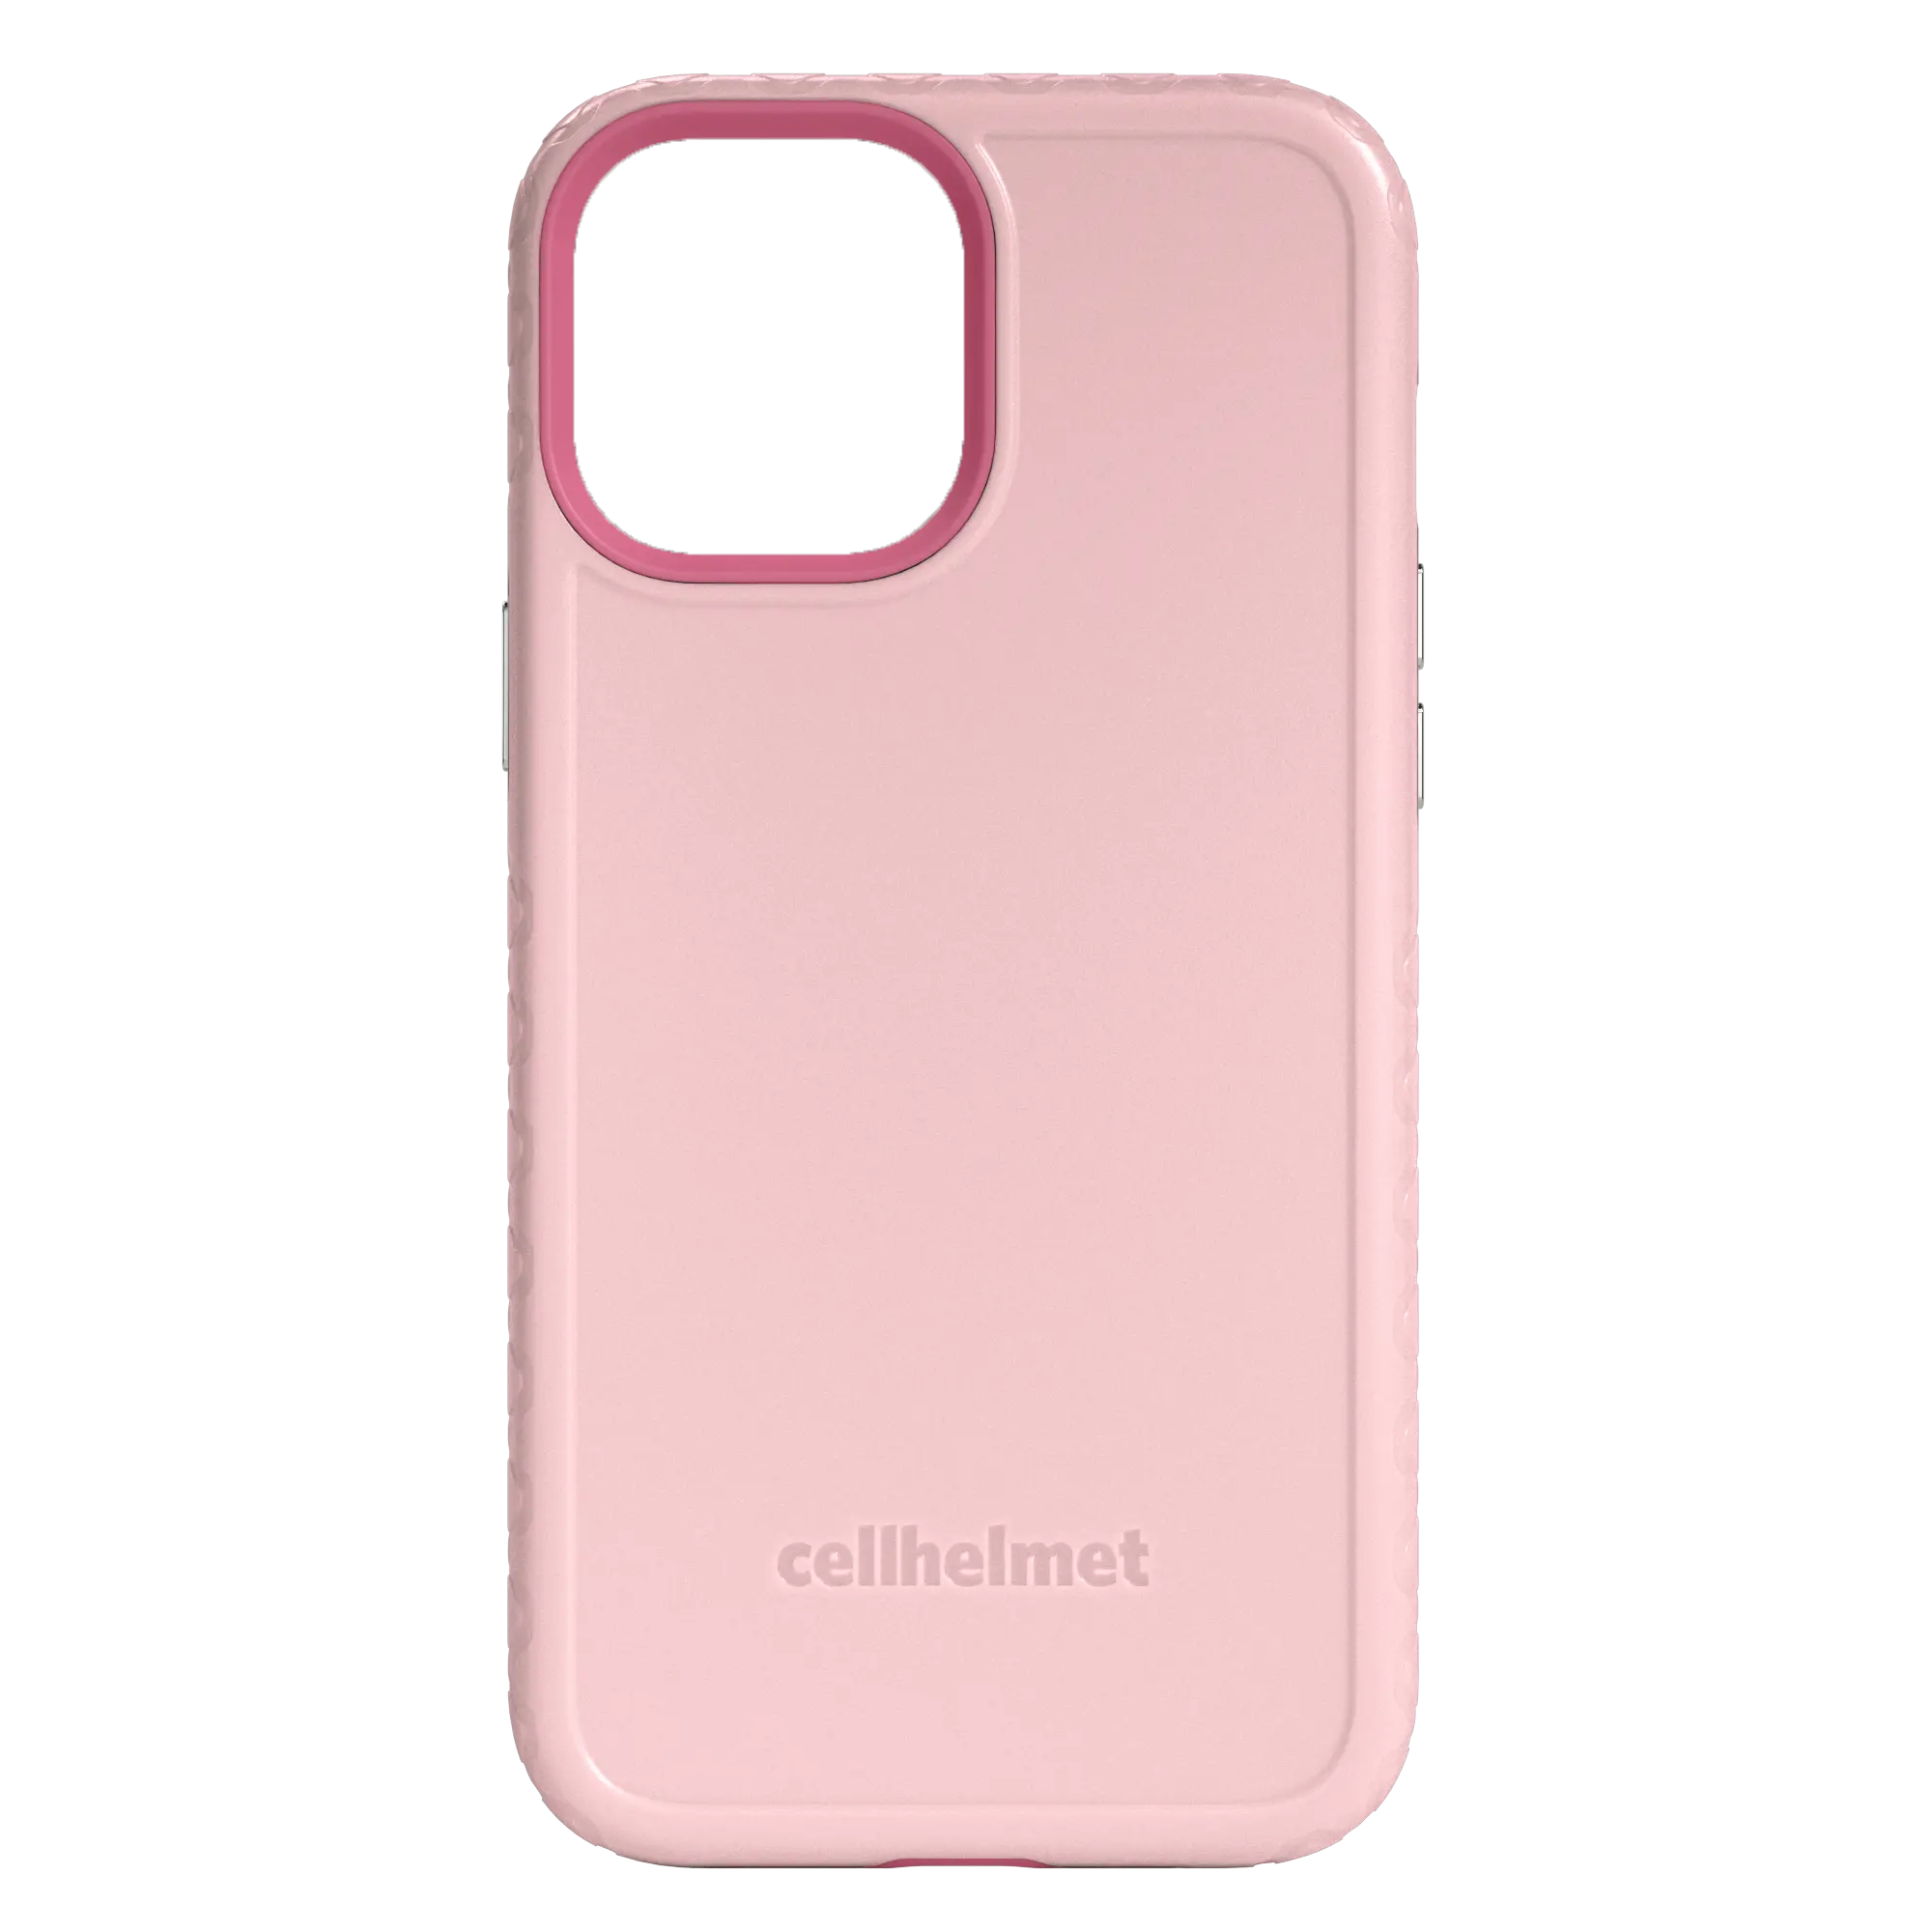 Pink cellhelmet Customizable Case for iPhone 12 Pro Max